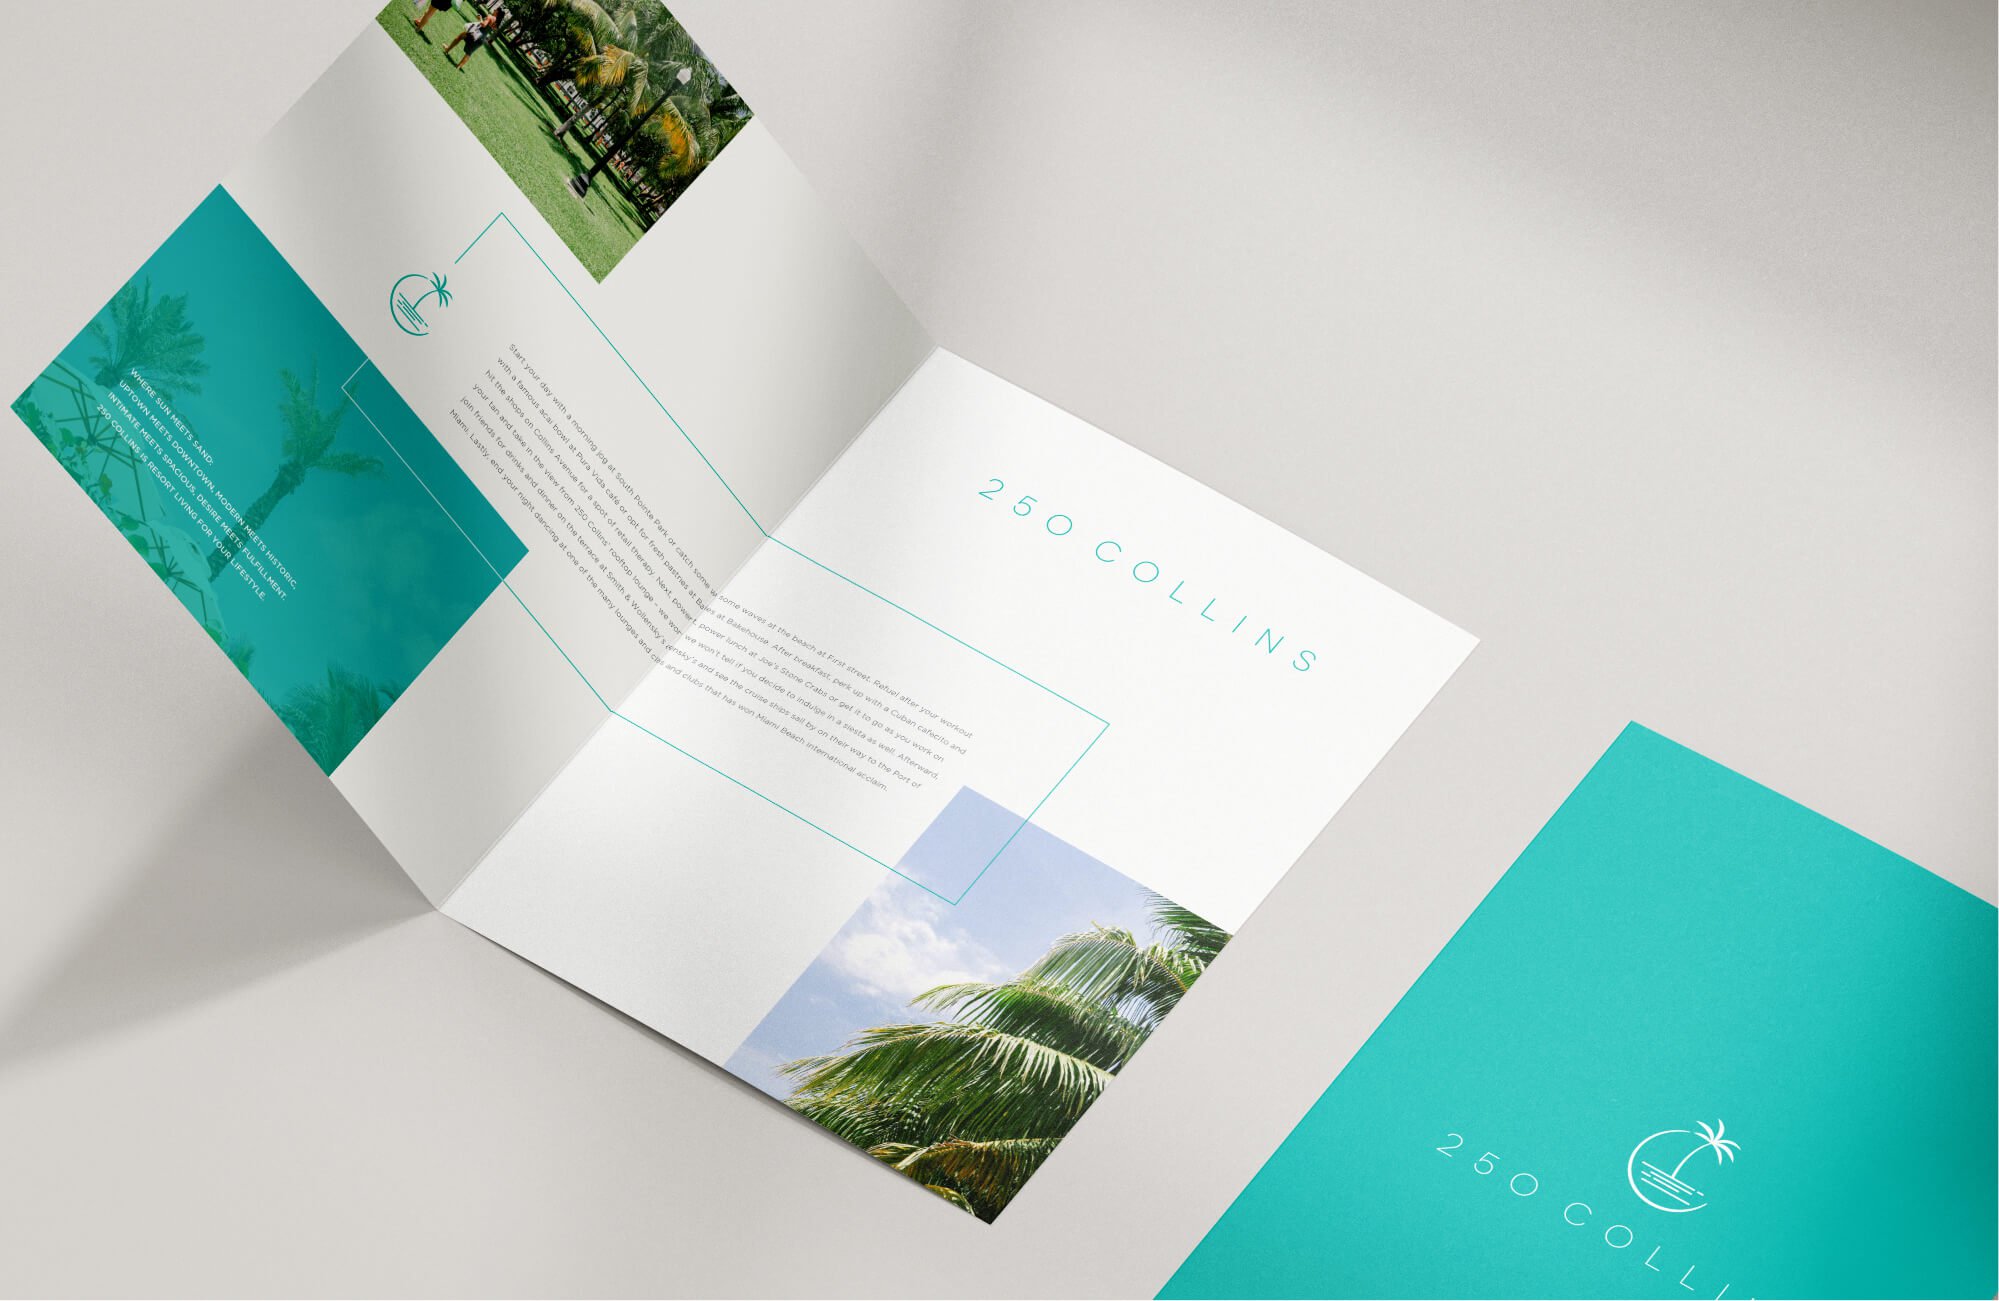 Jacober Creative Brand Identity for 250 Collins luxury apartments. Photo of brochure